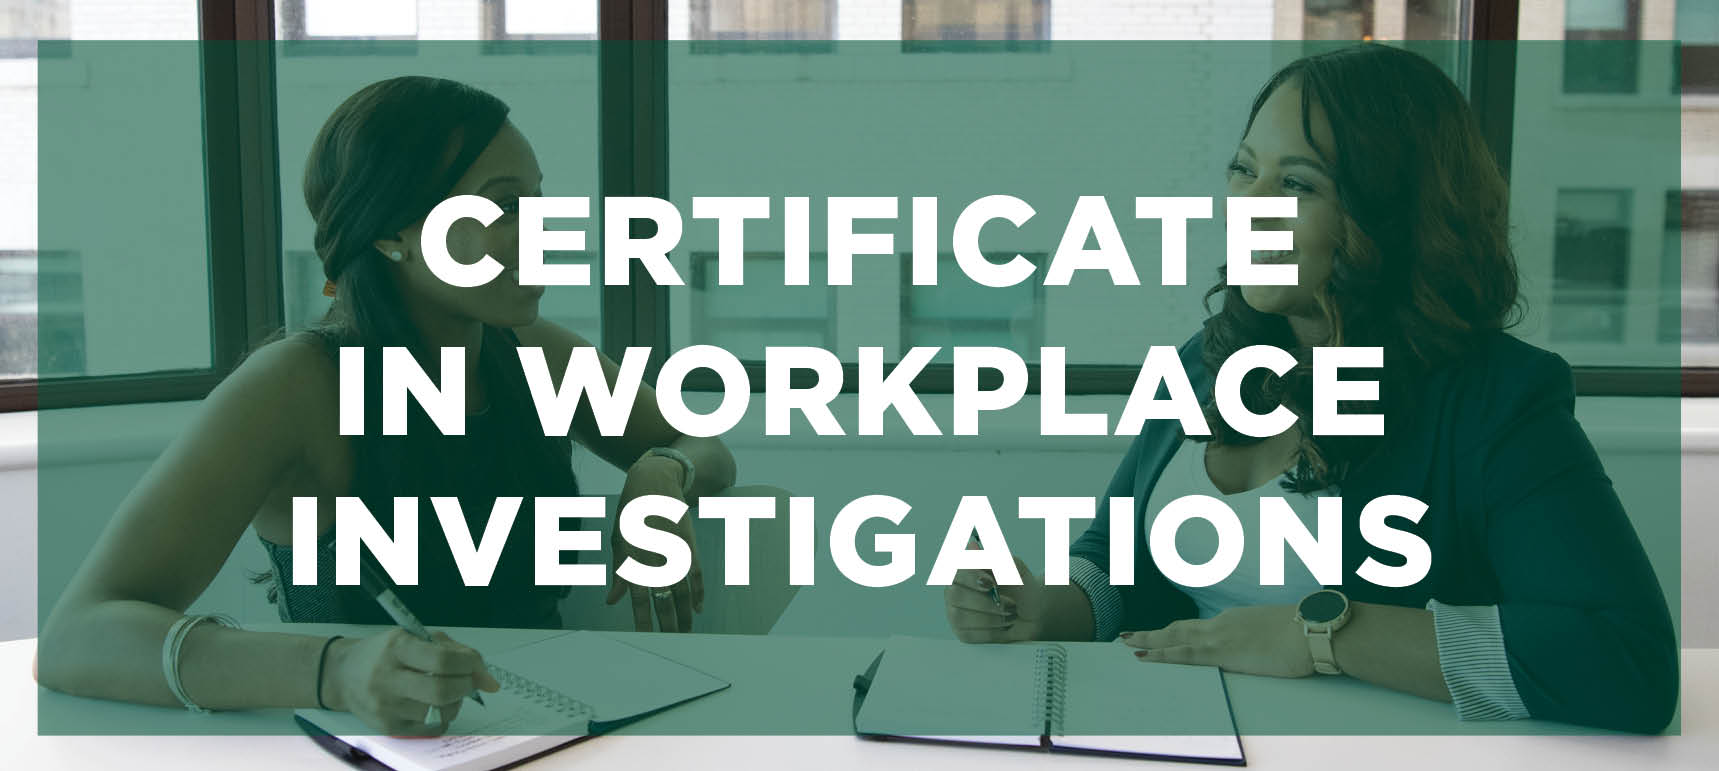 Learn more about the Certificate in Workplace Investigations program